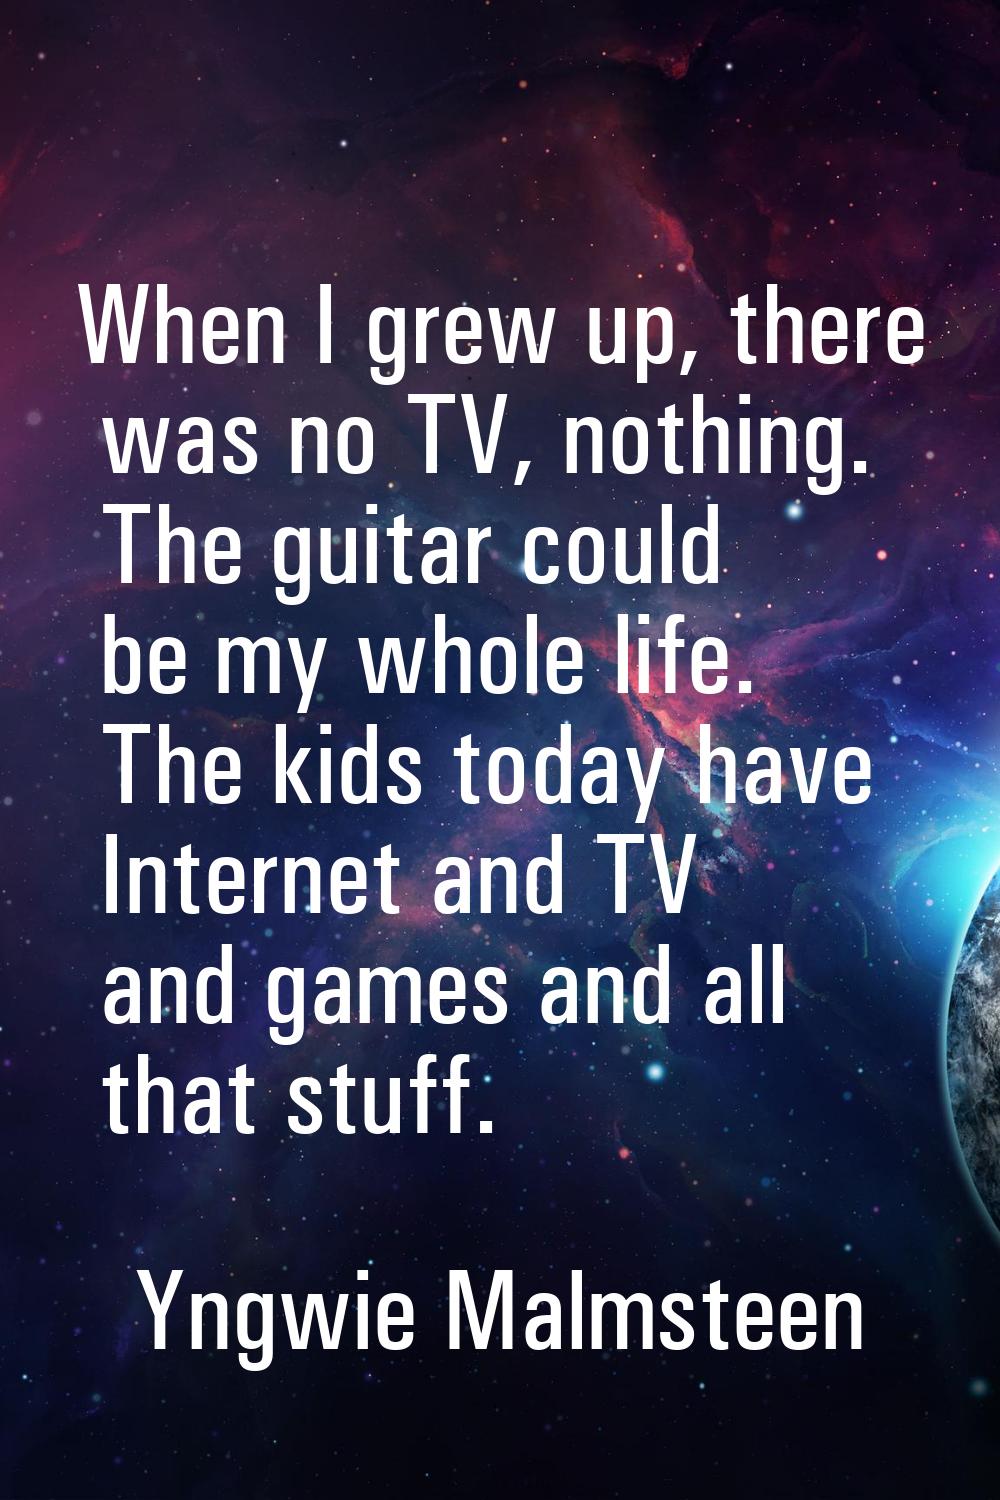 When I grew up, there was no TV, nothing. The guitar could be my whole life. The kids today have In